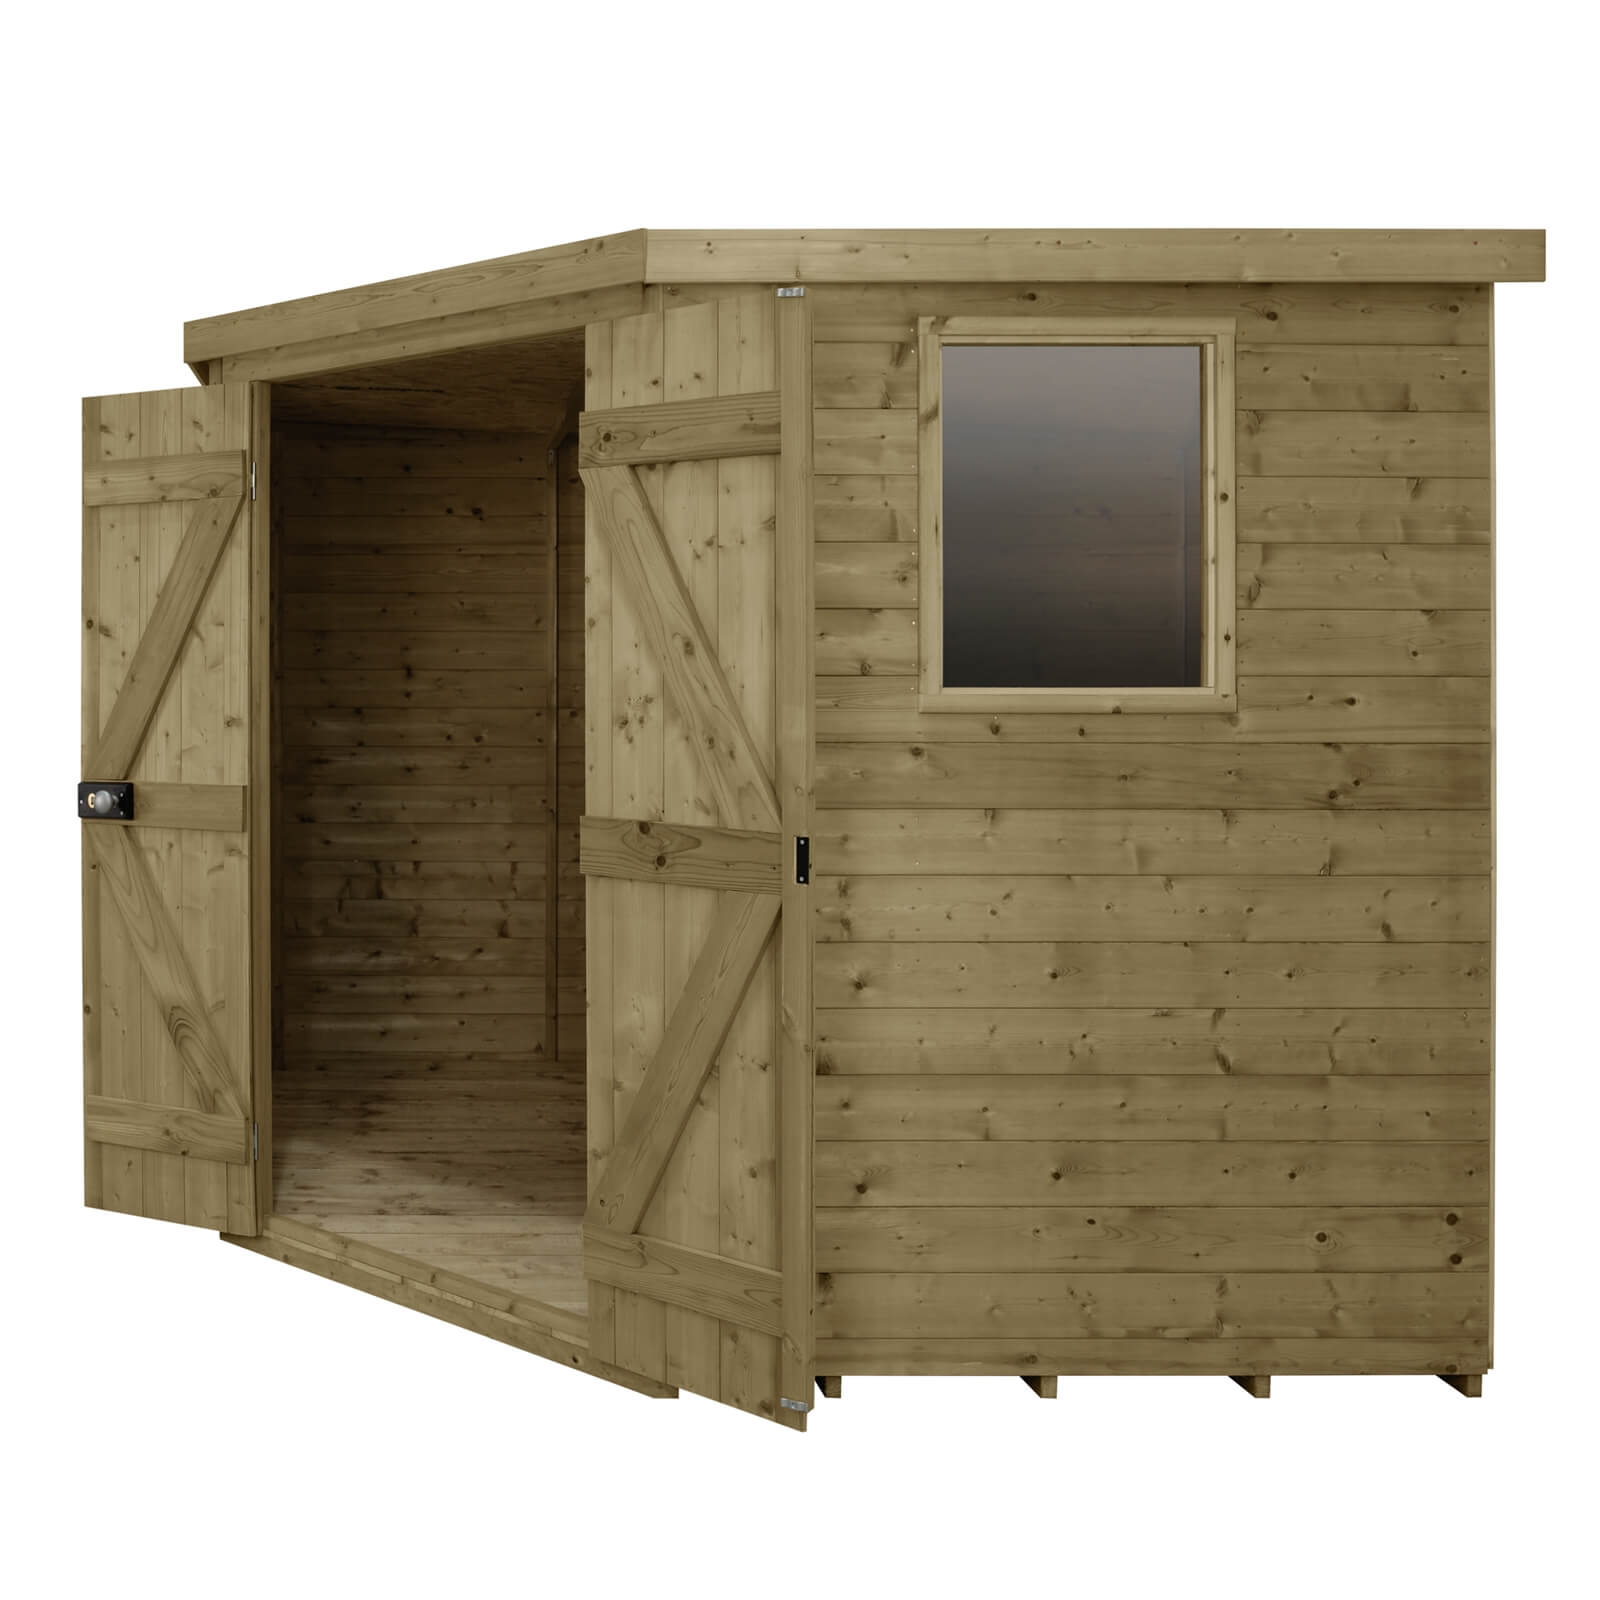 8x8ft Forest T&G Pressure Treated Corner Shed - incl. Installation